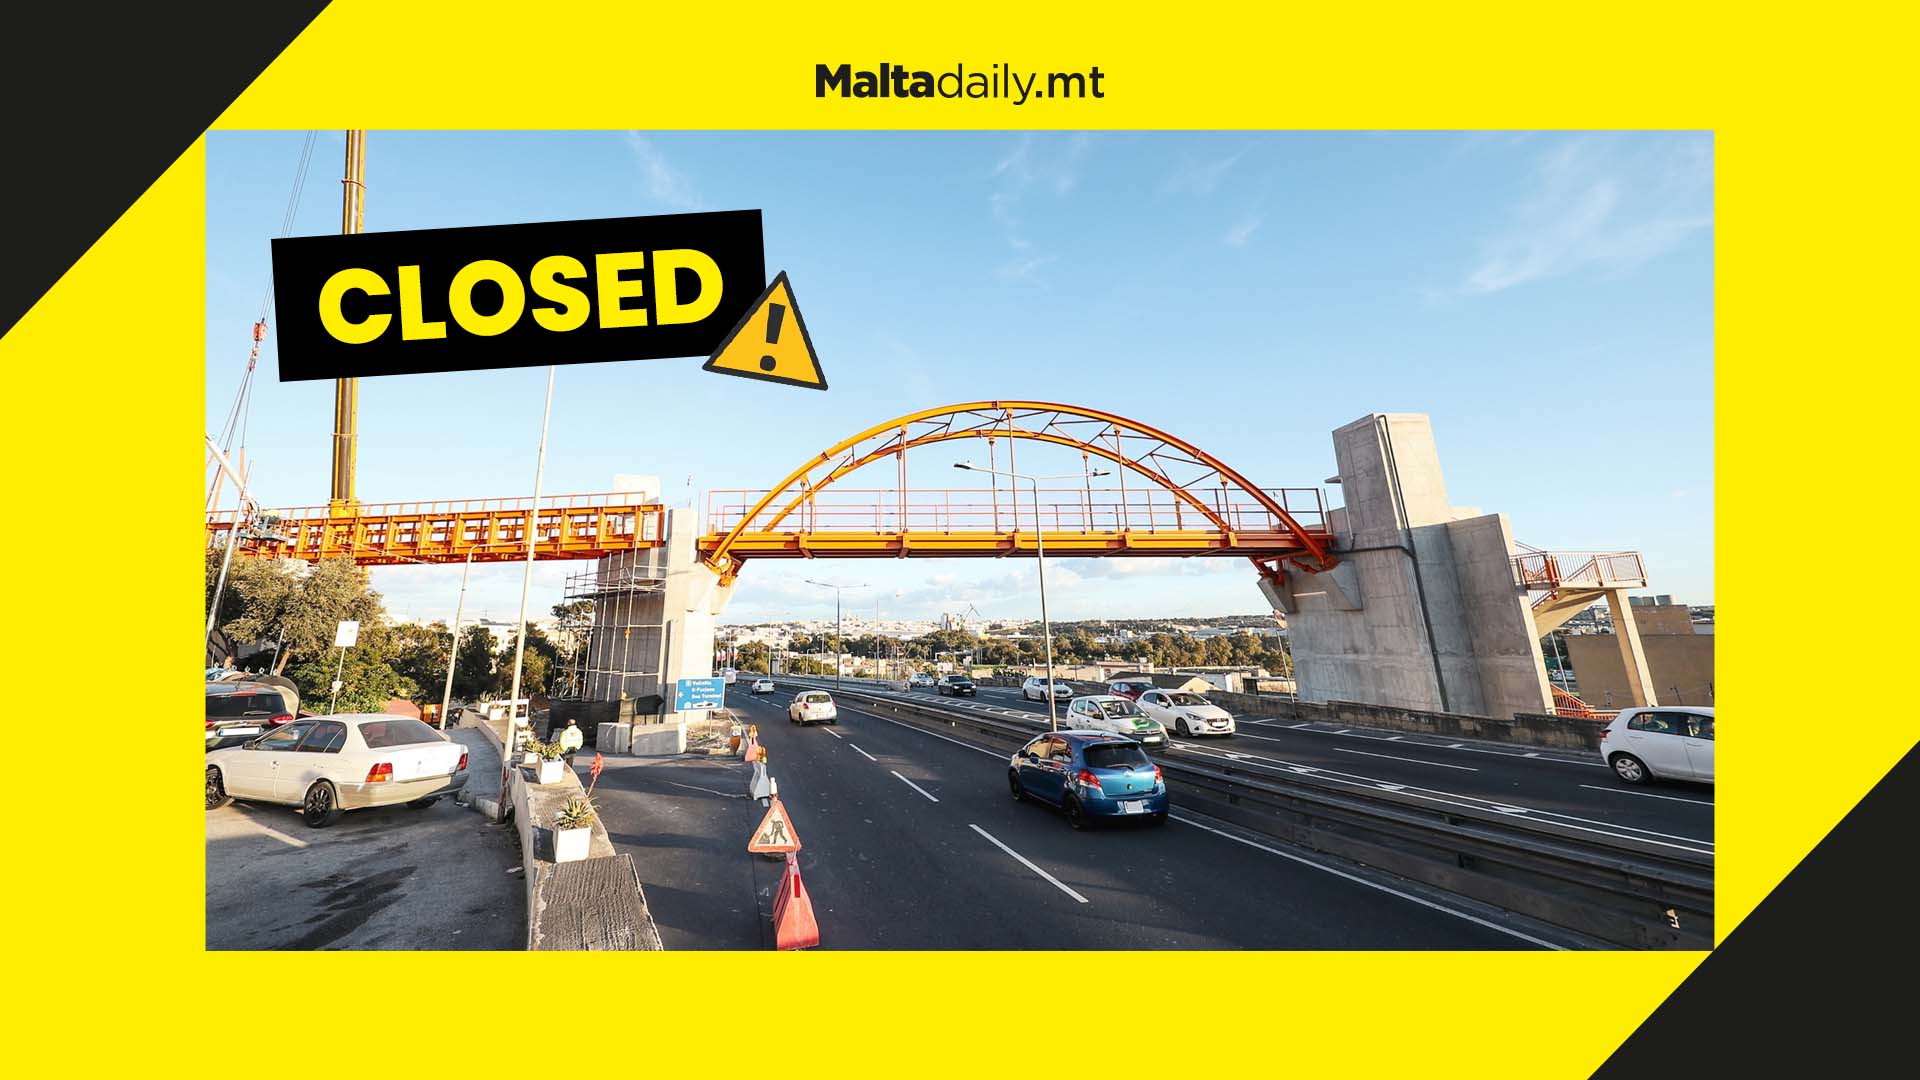 Marsa-Valletta to be closed for 24 hours, Infrastructure Malta announce